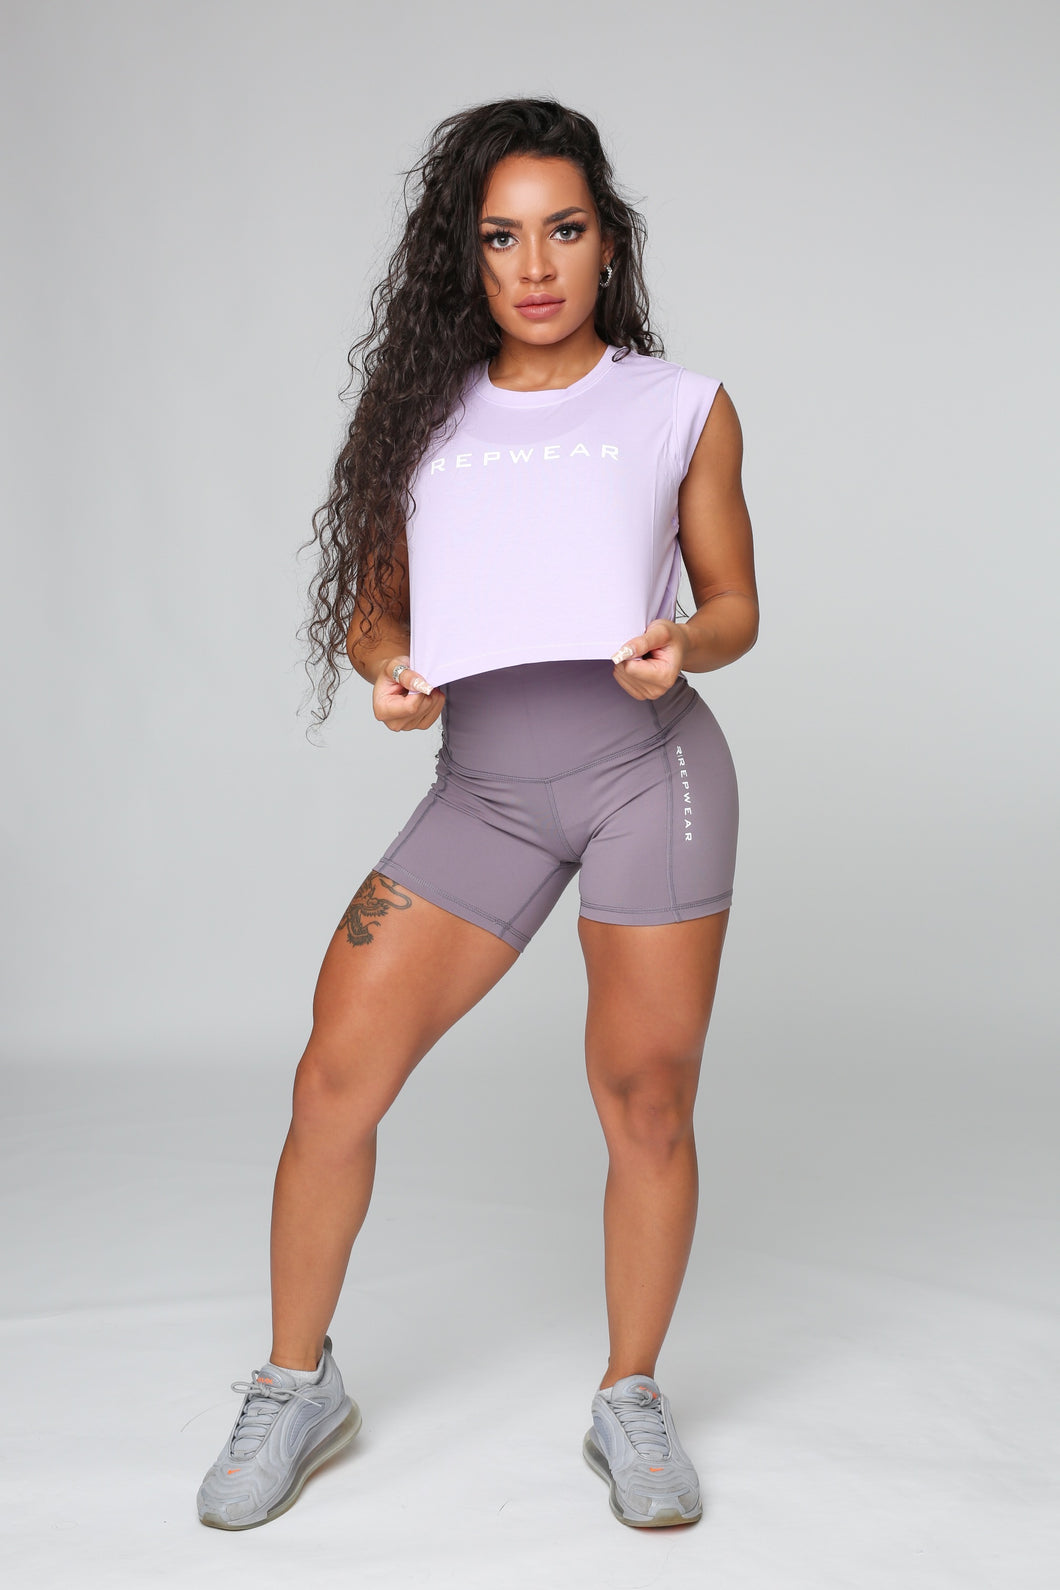 Repwear Fitness Cropped T-shirt Lilac